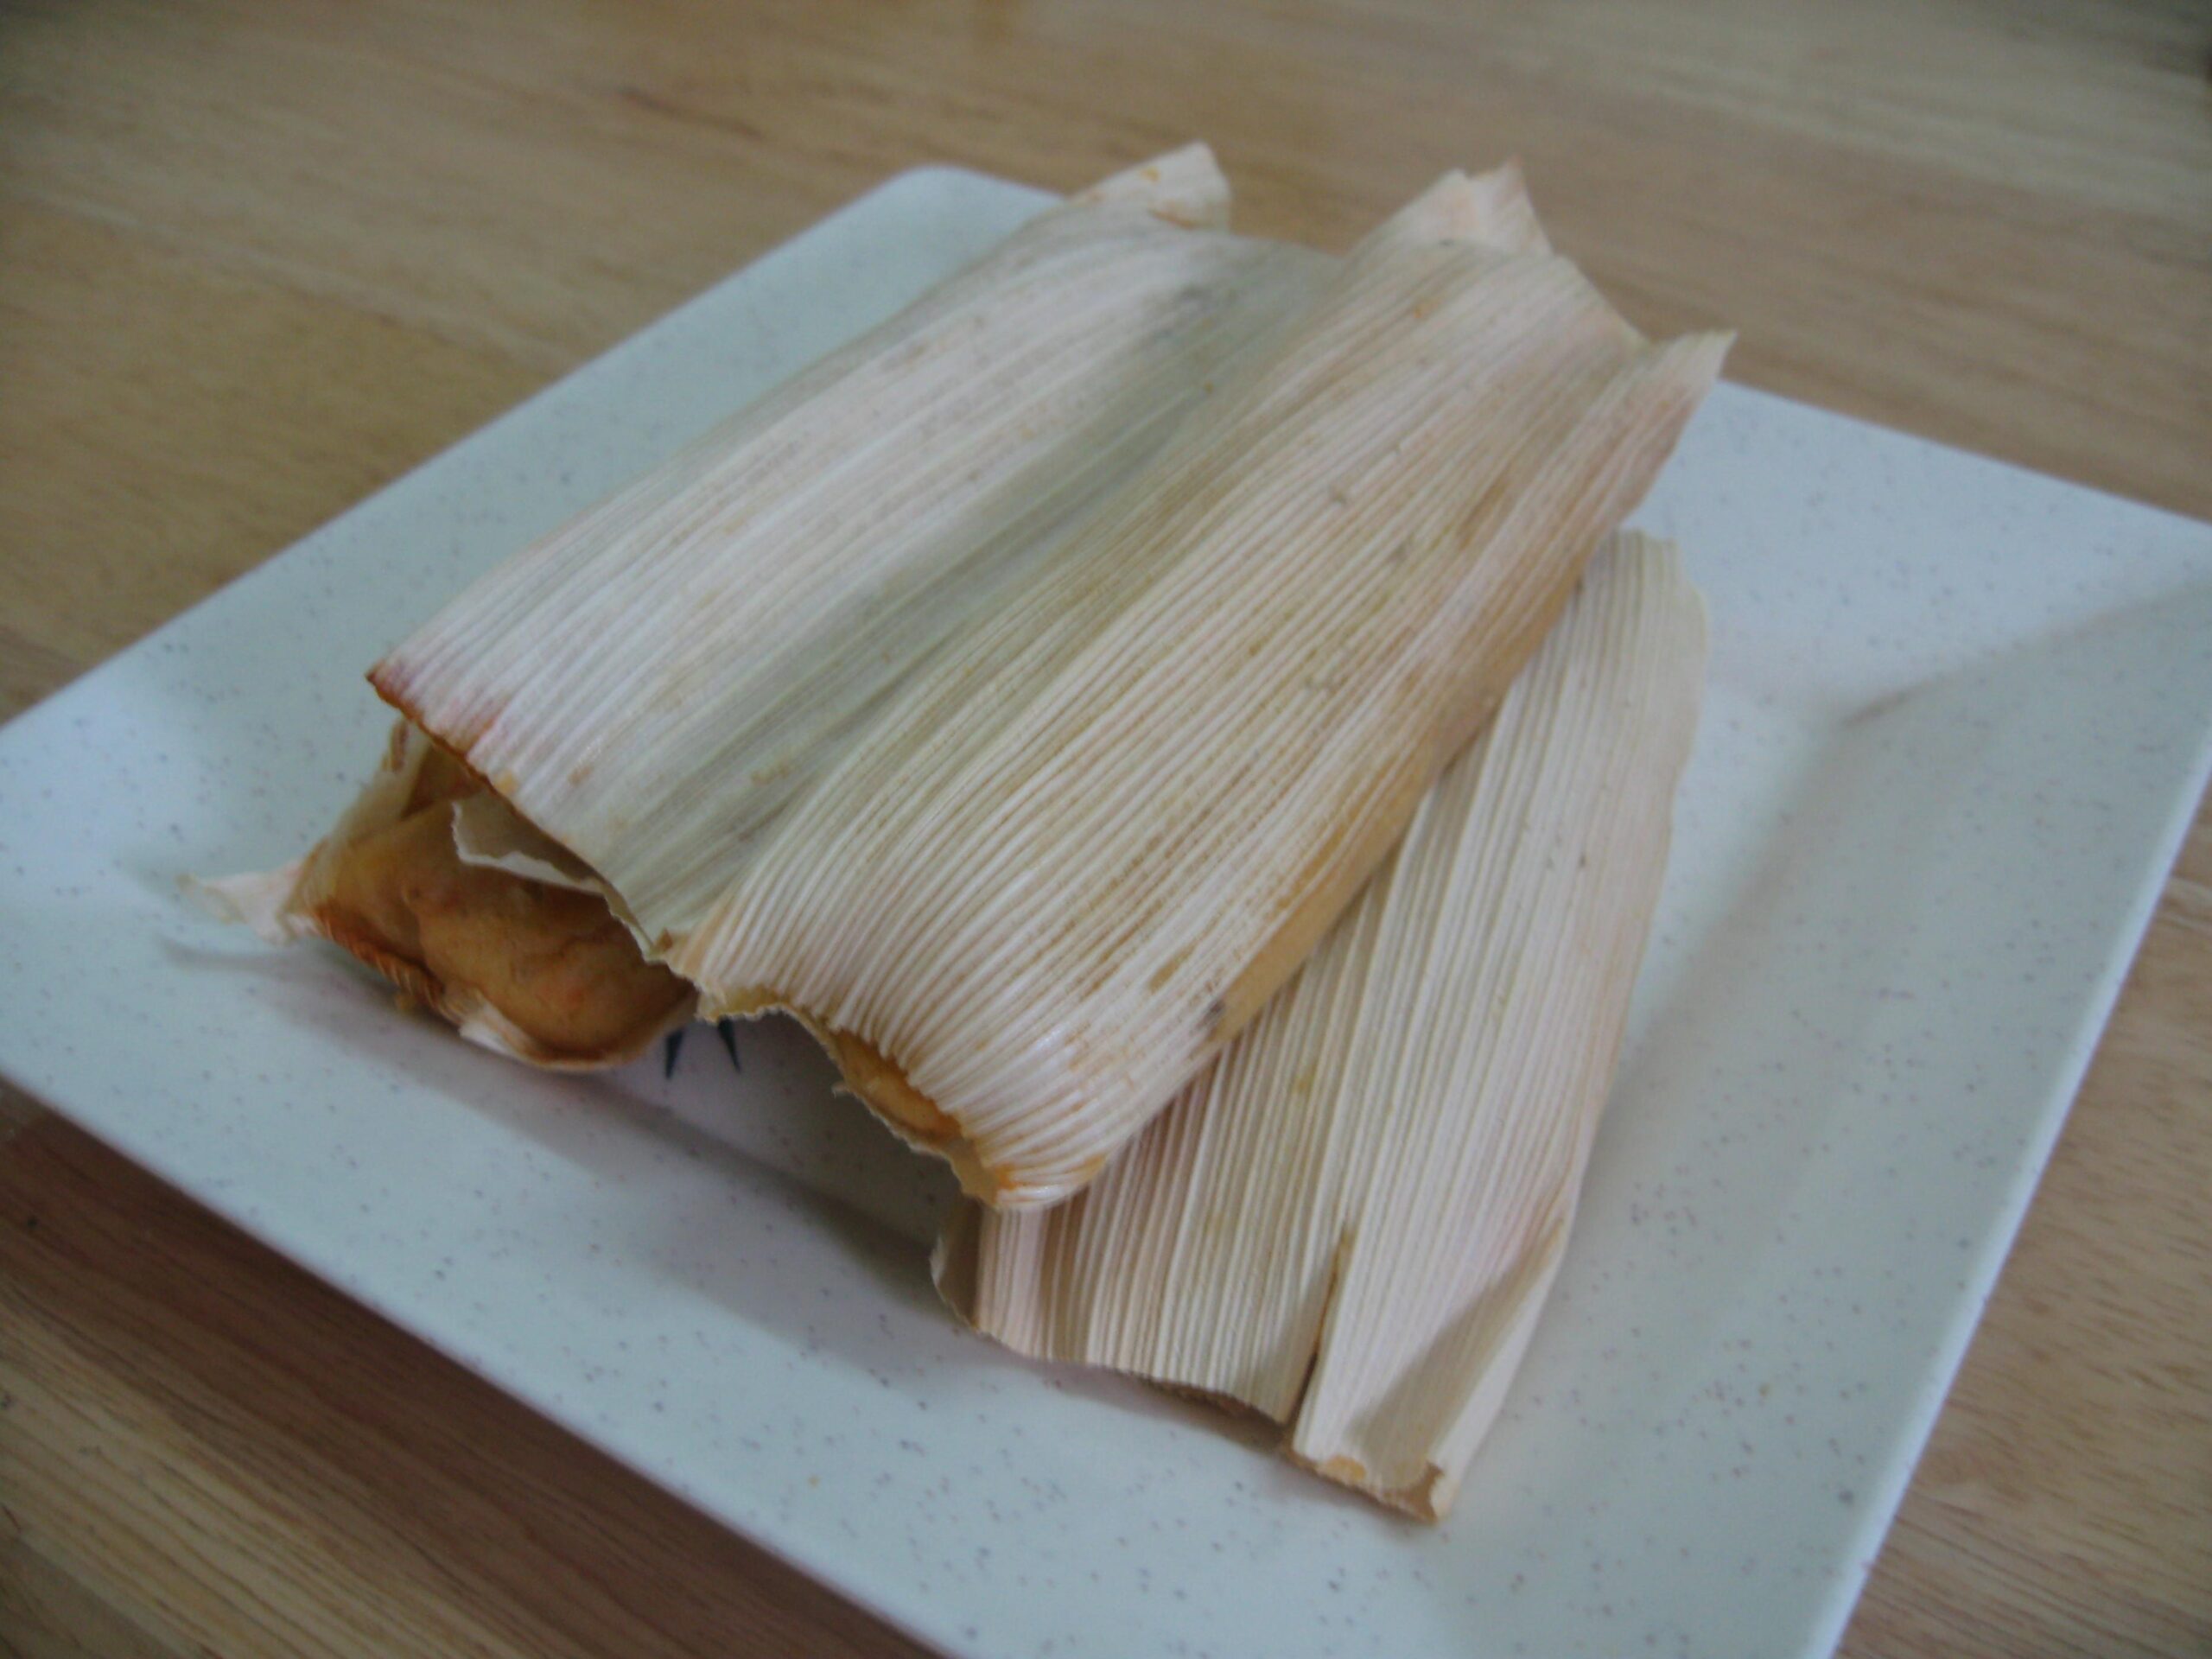  These tamales are like a fiesta in your mouth - the perfect party food!